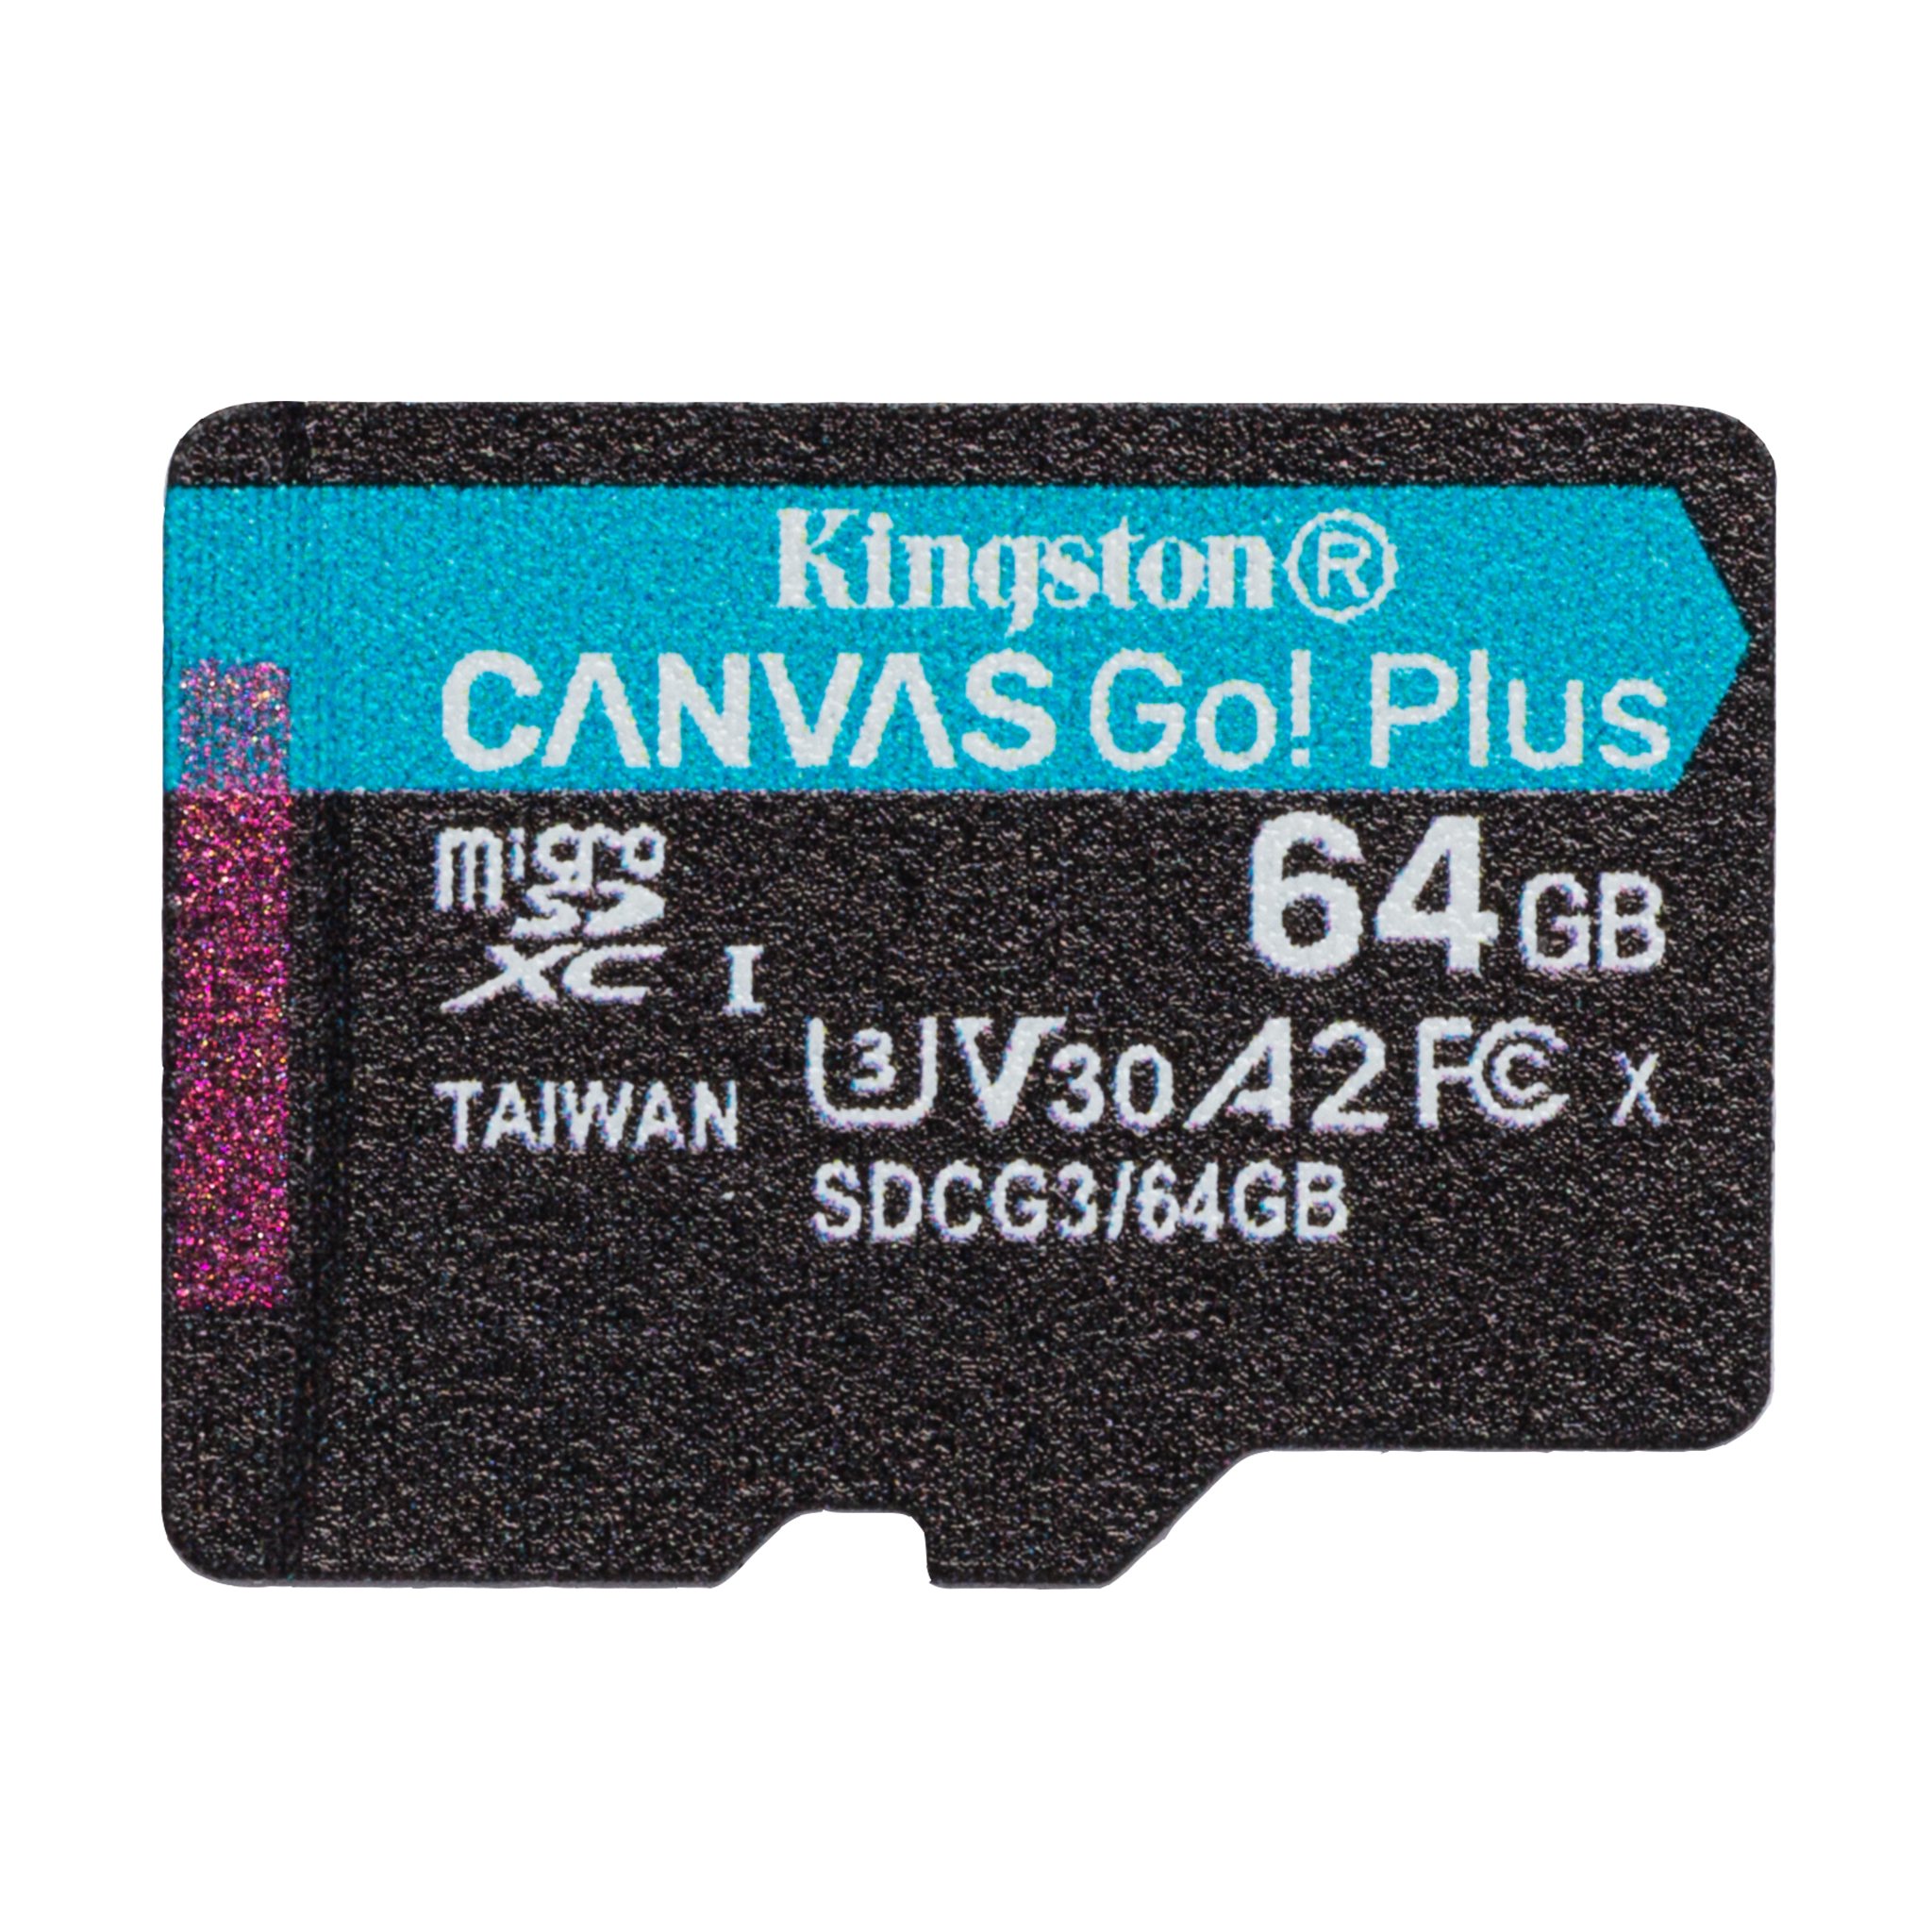 100MBs Works with Kingston Kingston 64GB LG VS835 MicroSDXC Canvas Select Plus Card Verified by SanFlash.